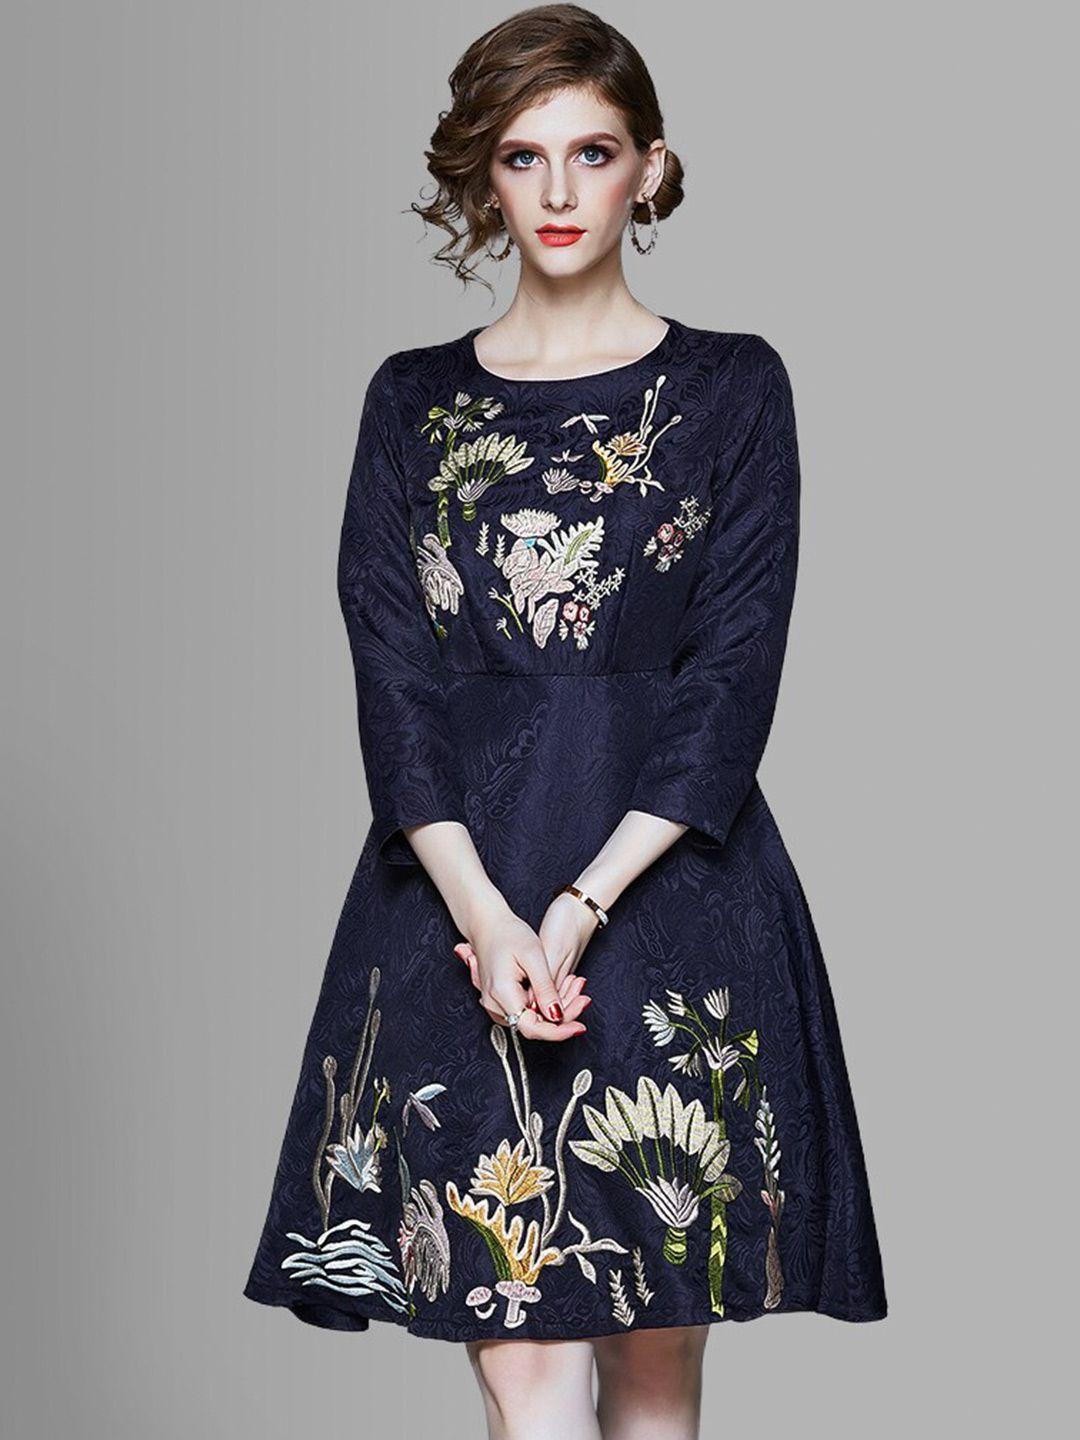 jc-collection-women-navy-blue-floral-embroidered-fit-&-flare-dress